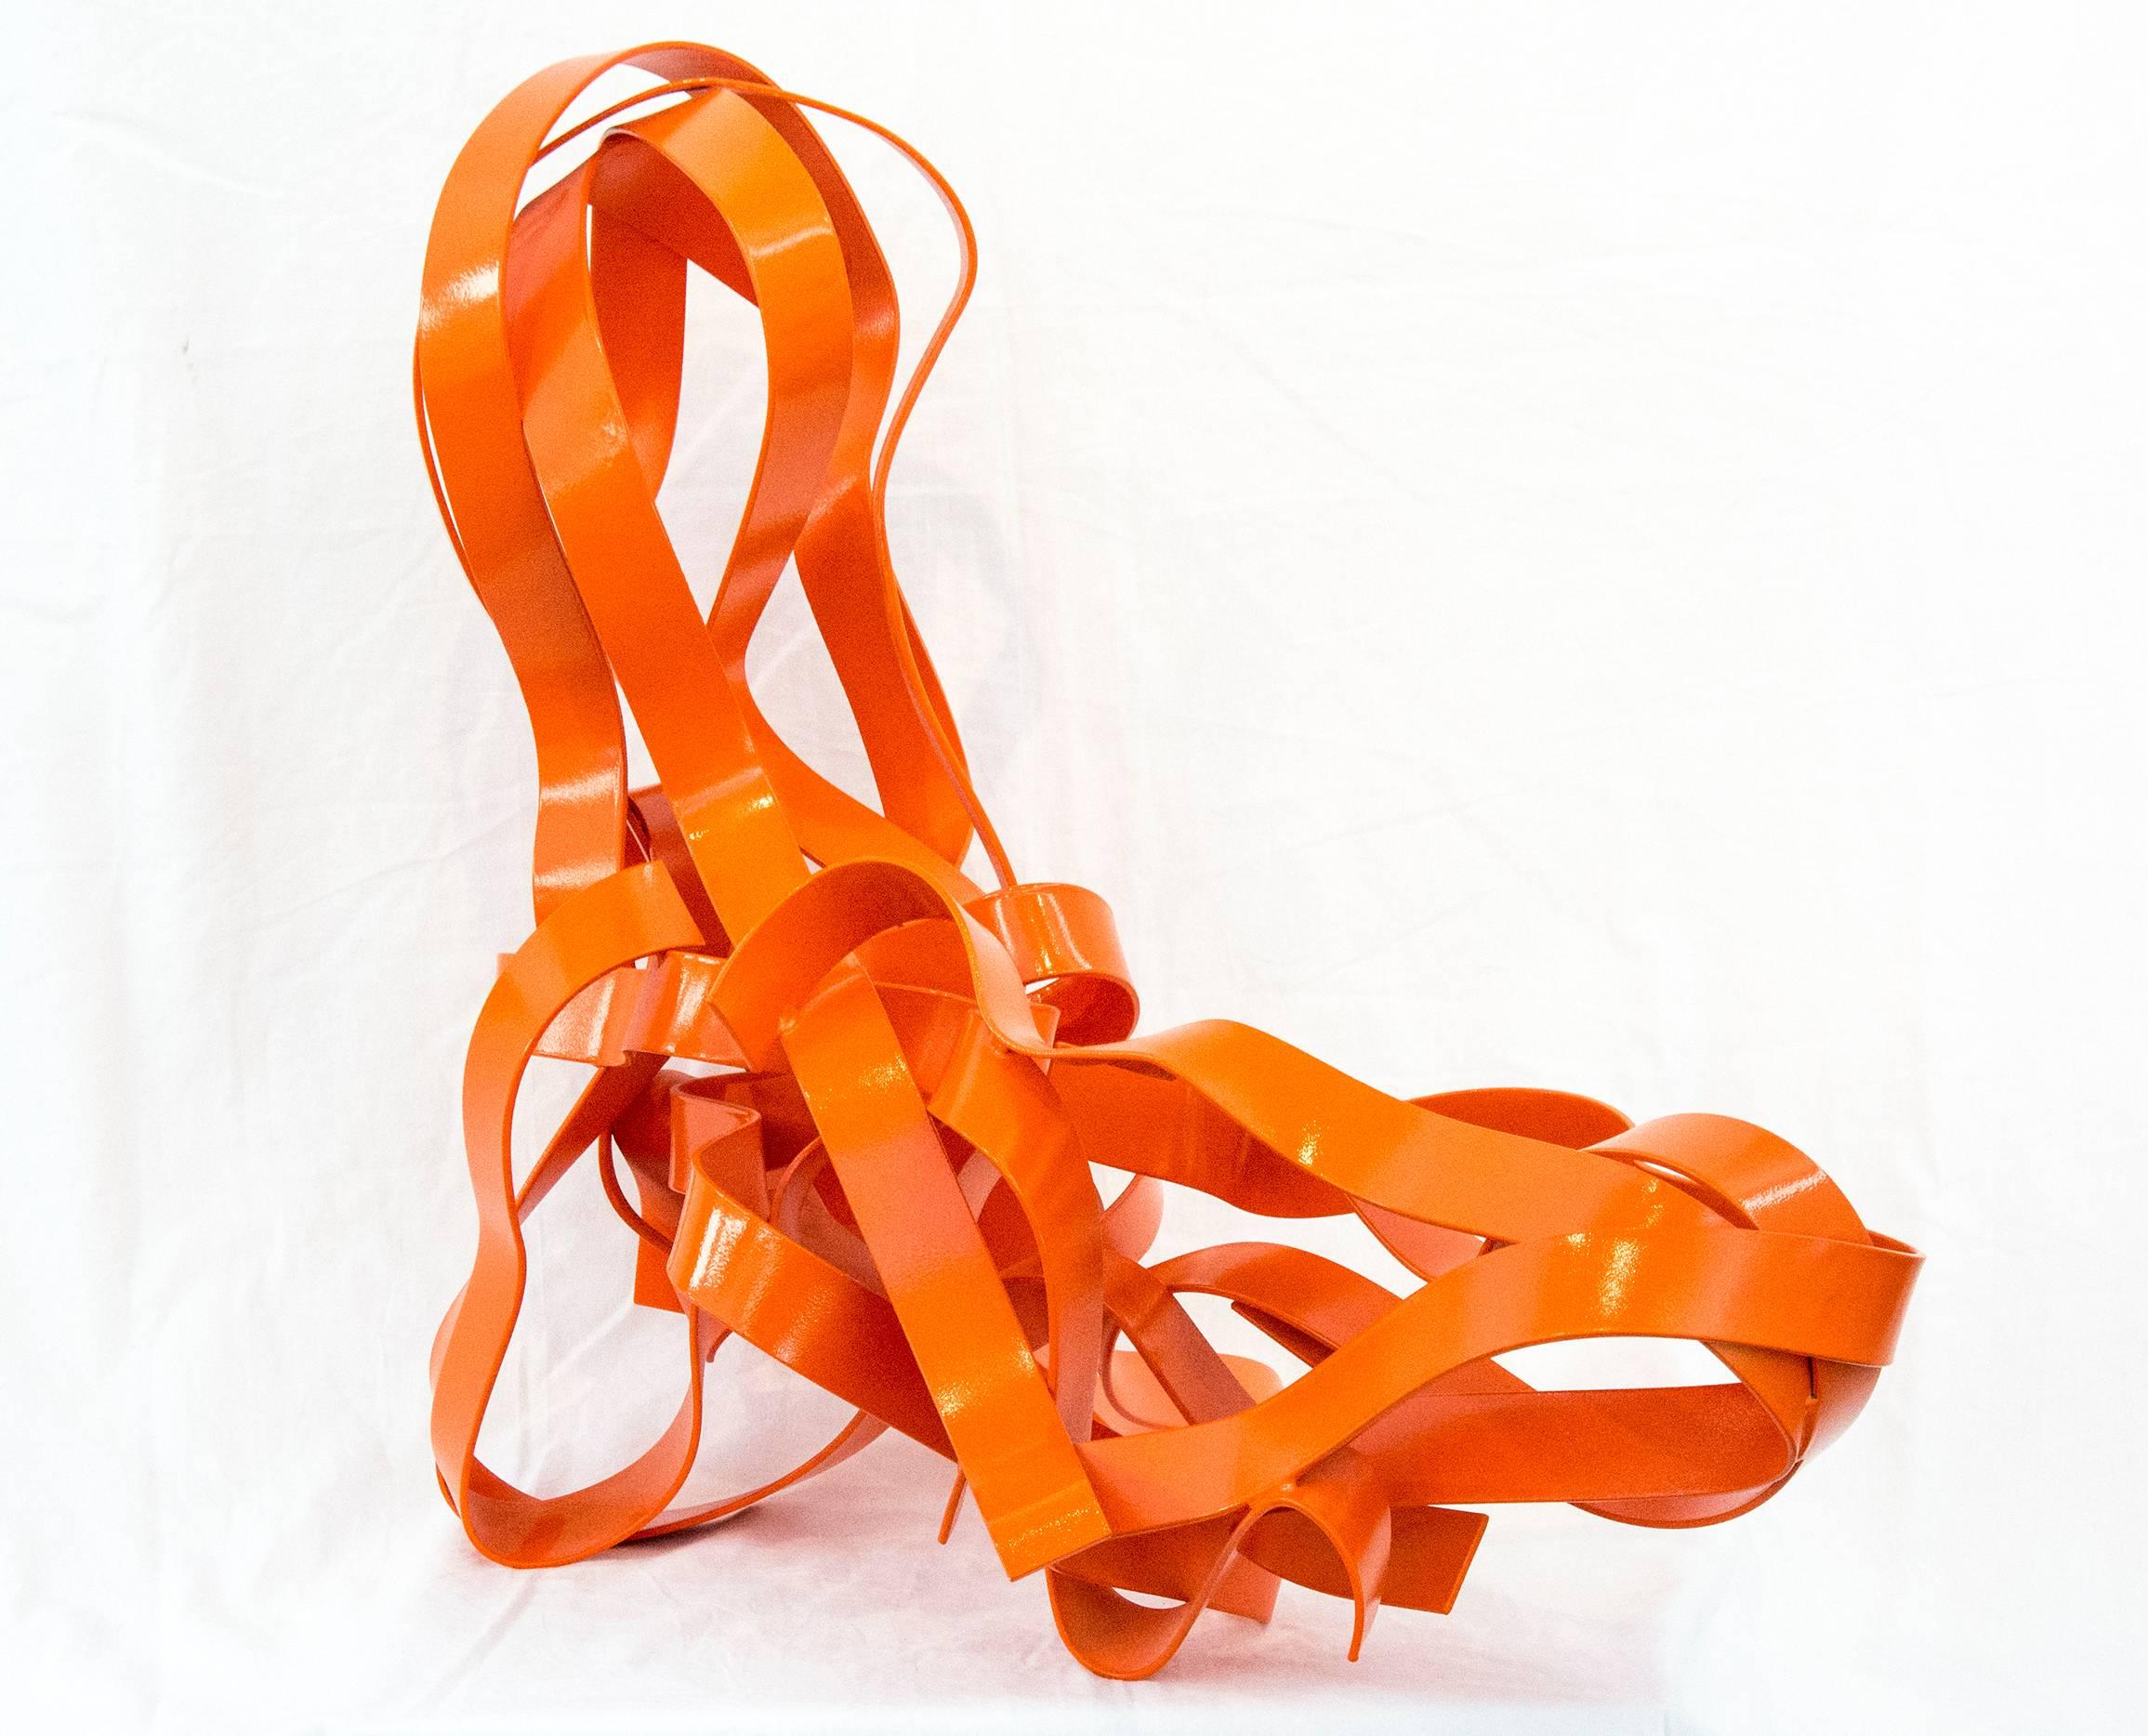 Ribbons of glossy, bright orange steel follow circuitous paths that unwind and intersect gracefully in this abstracted shape of a reclining figure. 

The seeming effortlessness of the flowing ribbons is belied by the physical process of making this